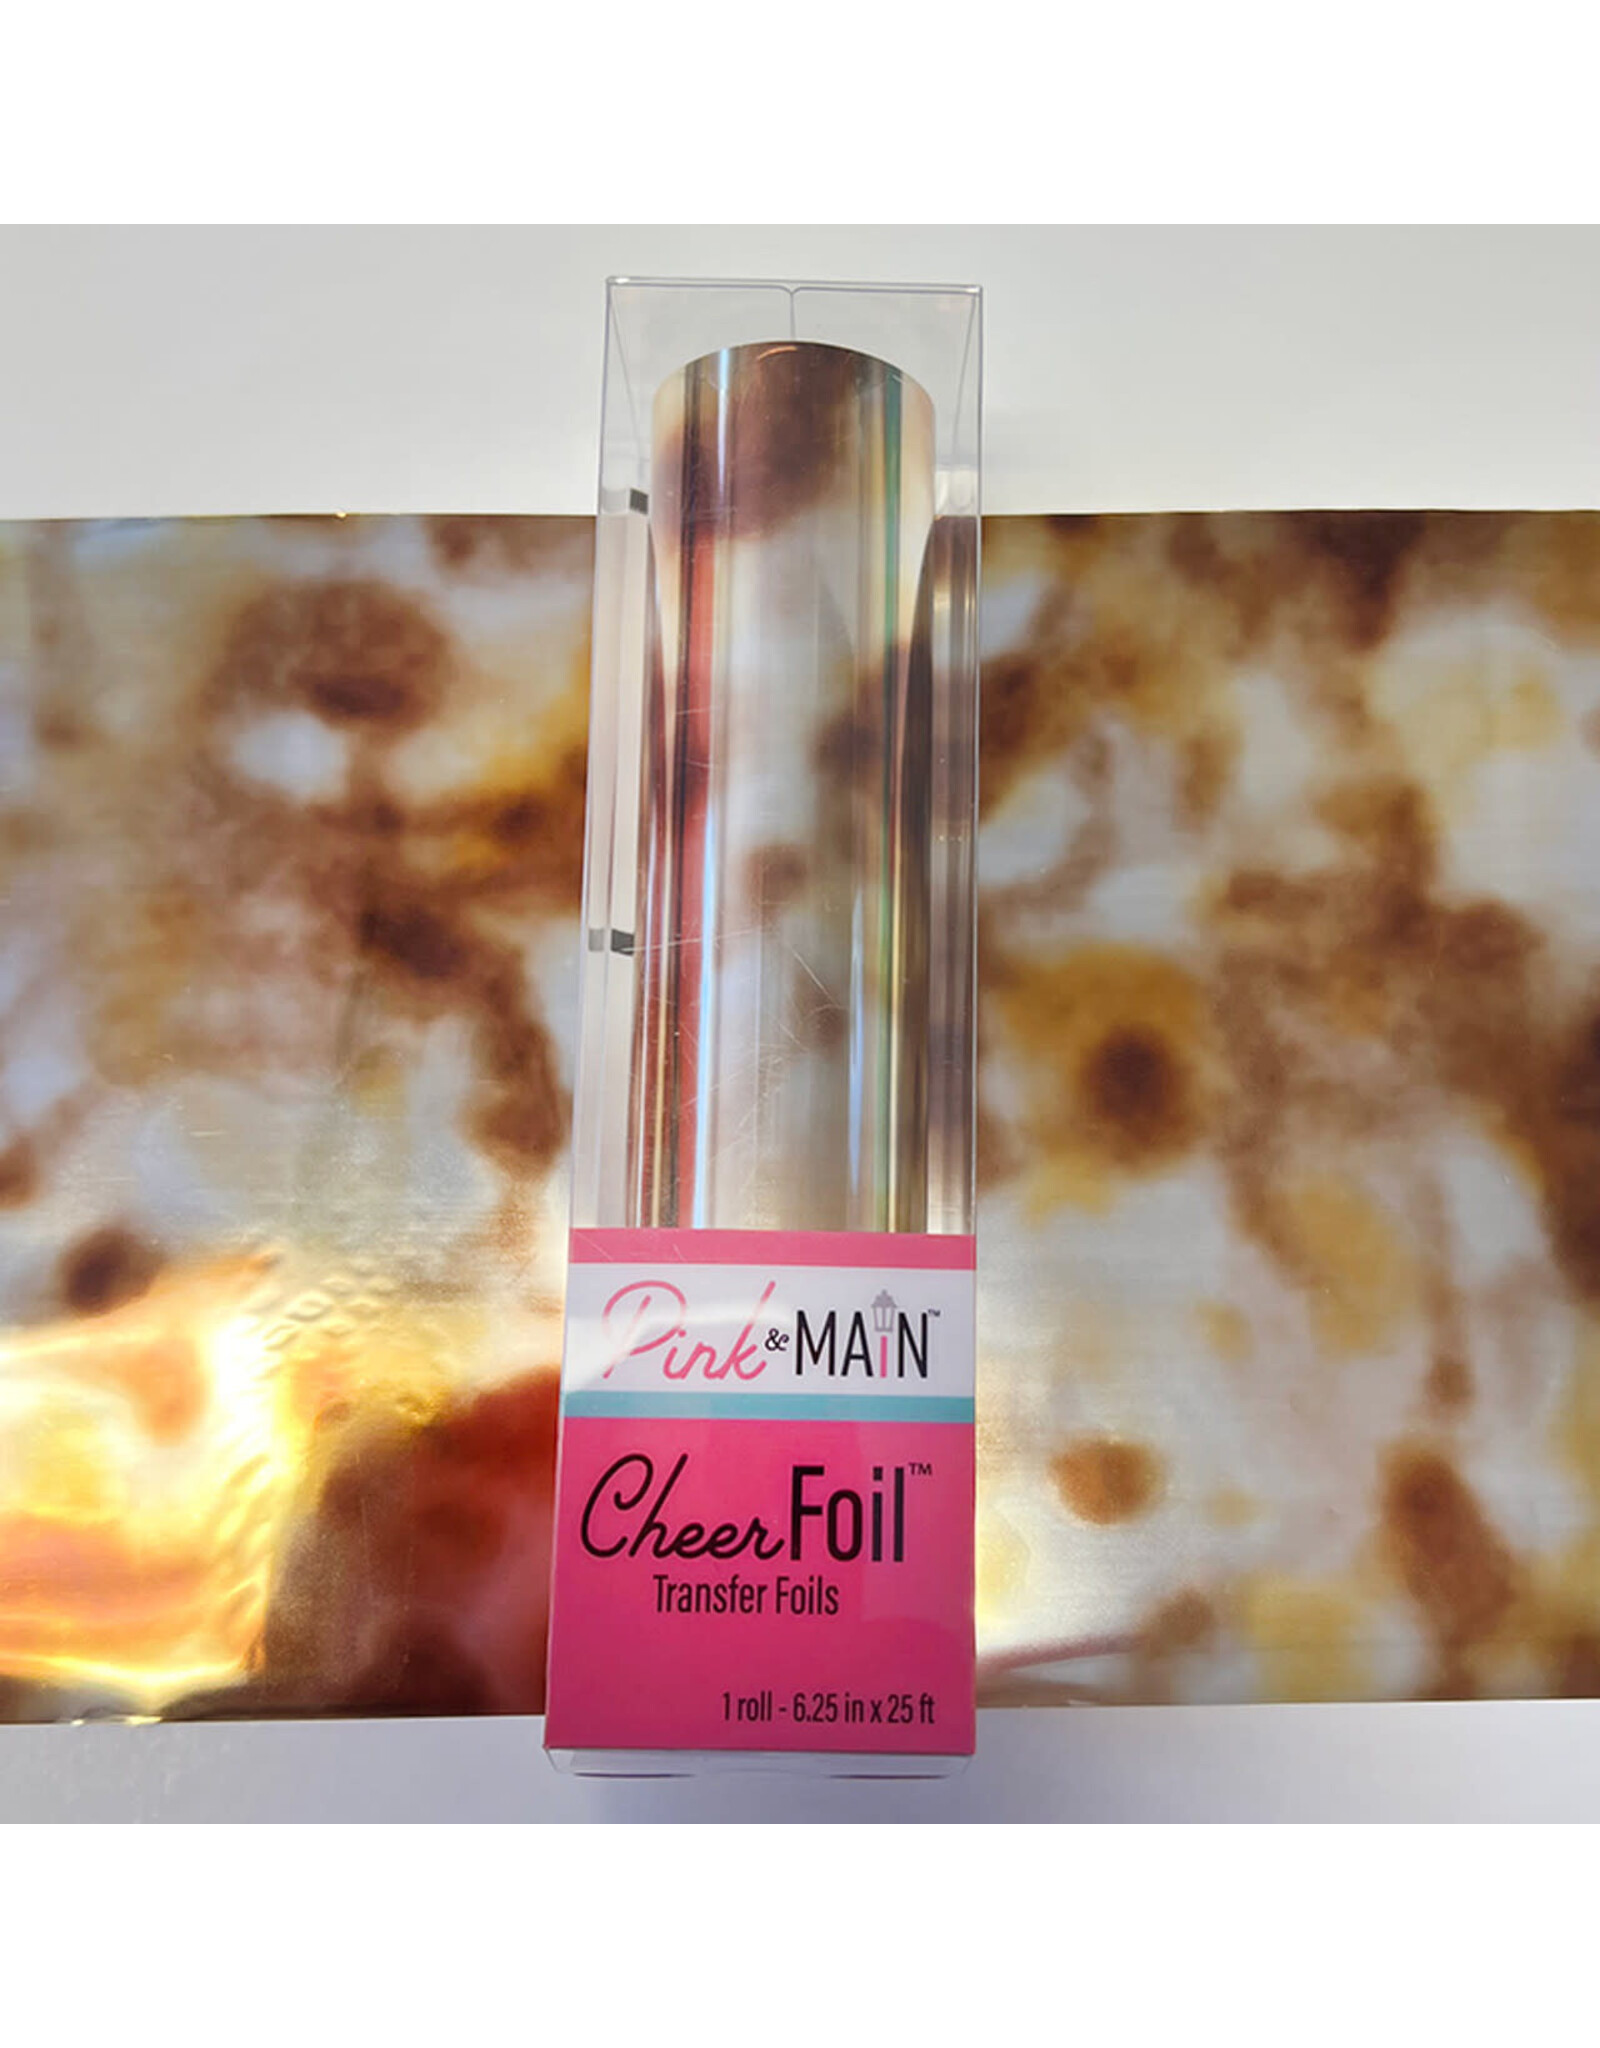 PINK & MAIN PINK & MAIN NEUTRAL CHEERFOIL 25ft